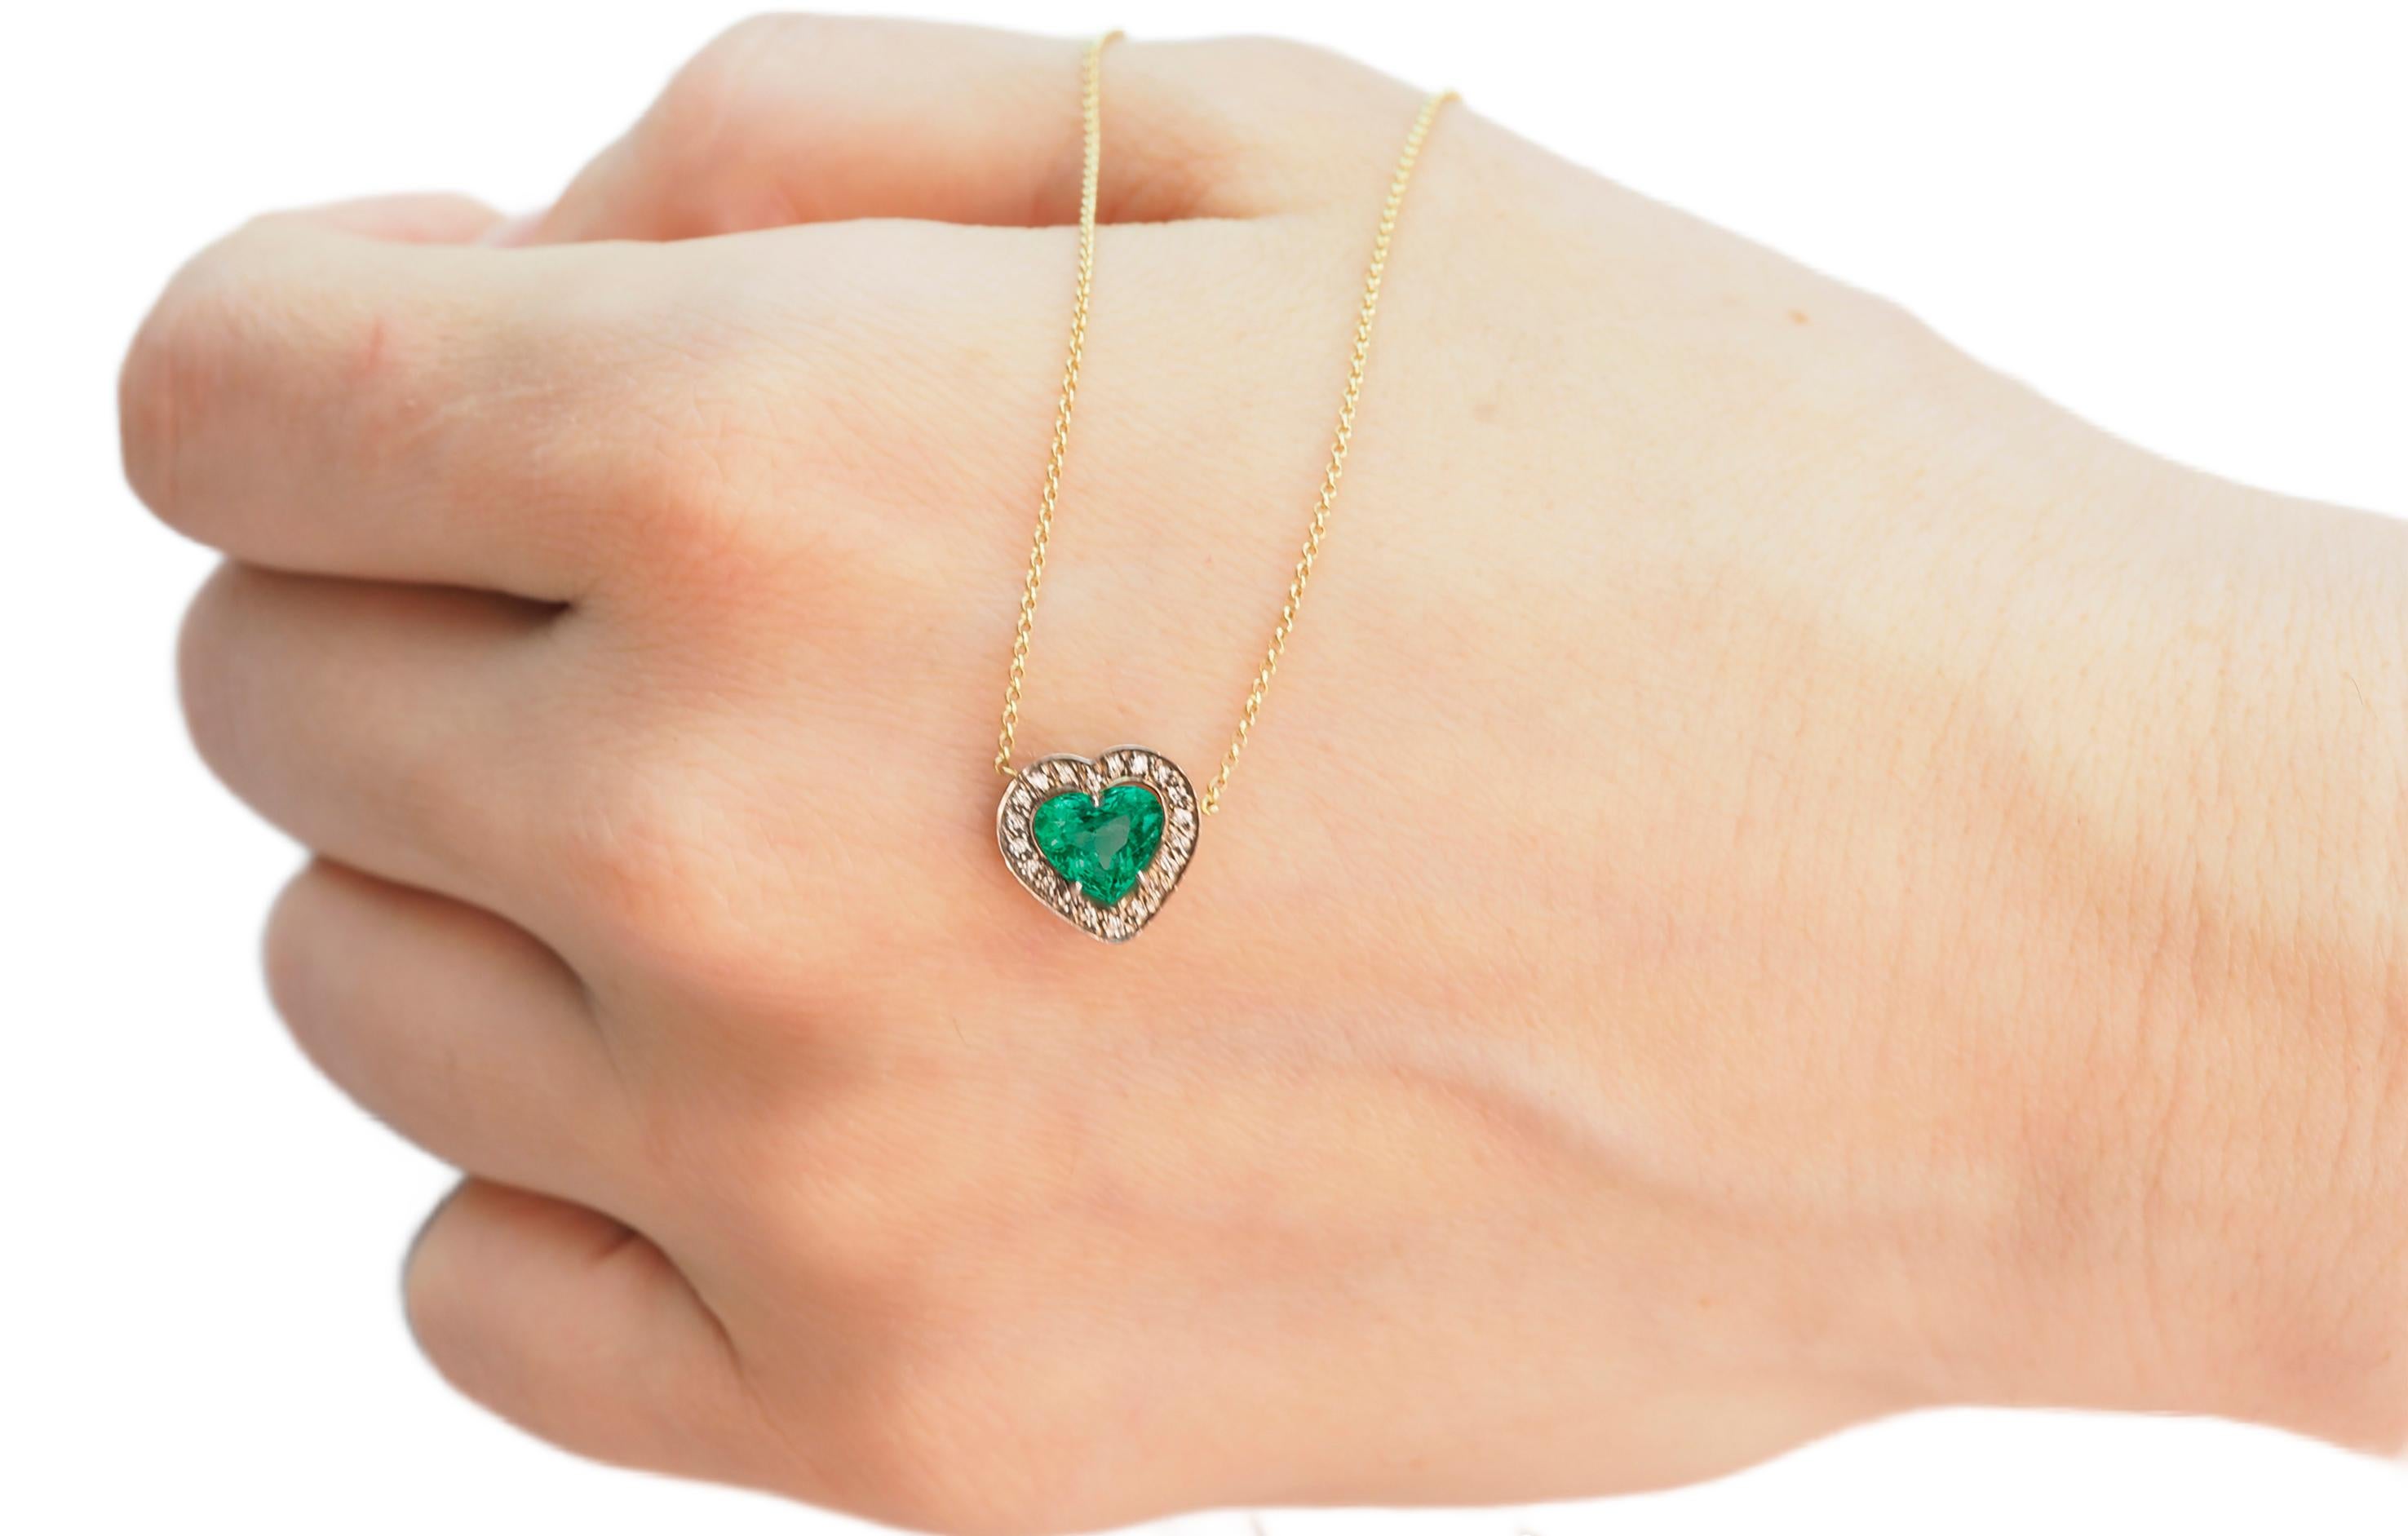 Emerald necklace pendant in 14 karat white gold. Emerald pendant. Heart emerald pendant necklace. Green emerald pendant. Emerald and diamonds necklace pendant. 

Weight: 3 g.
Necklace length - 44 sm
Pendant made in 14k white gold, necklace 14k